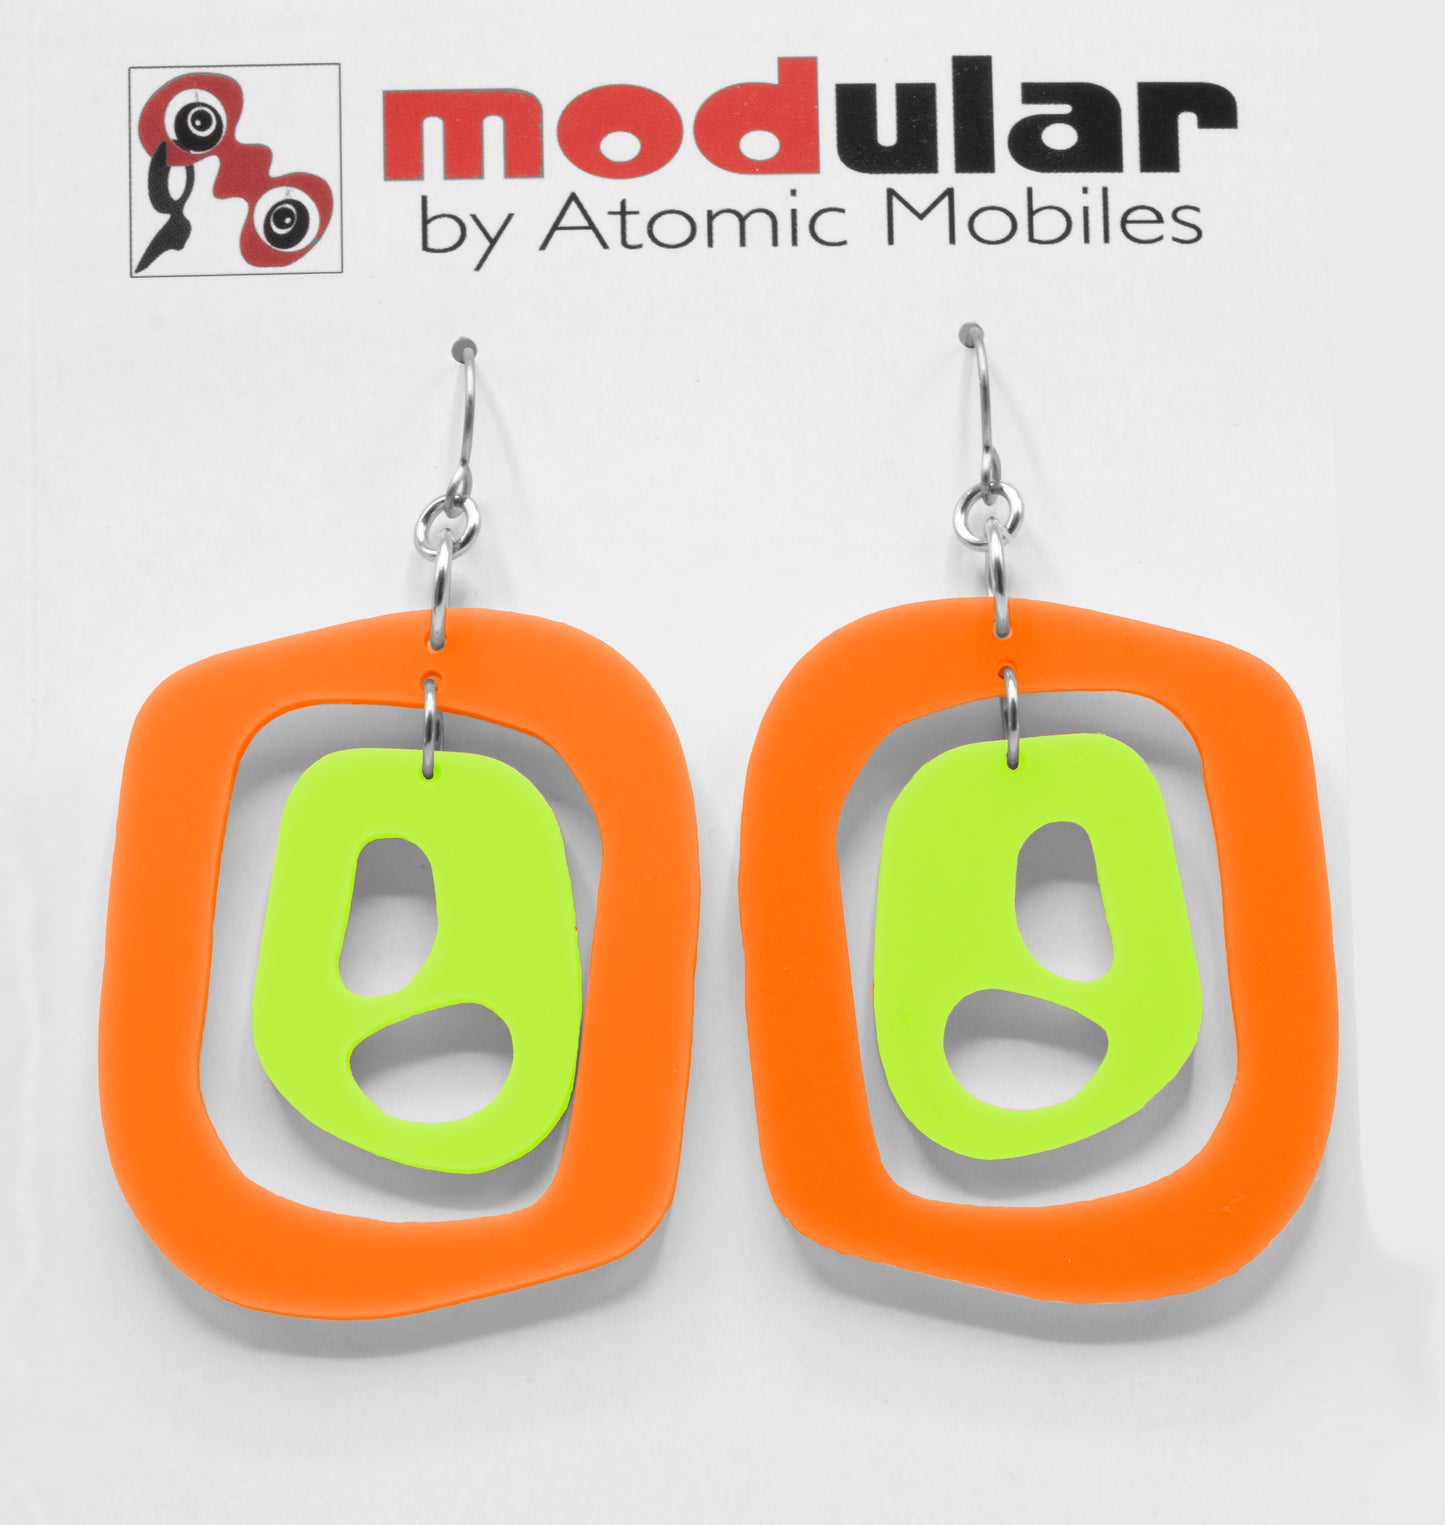 MODular Earrings - Mid 20th Statement Earrings in Orange and Lime by AtomicMobiles.com - retro era mod handmade jewelry